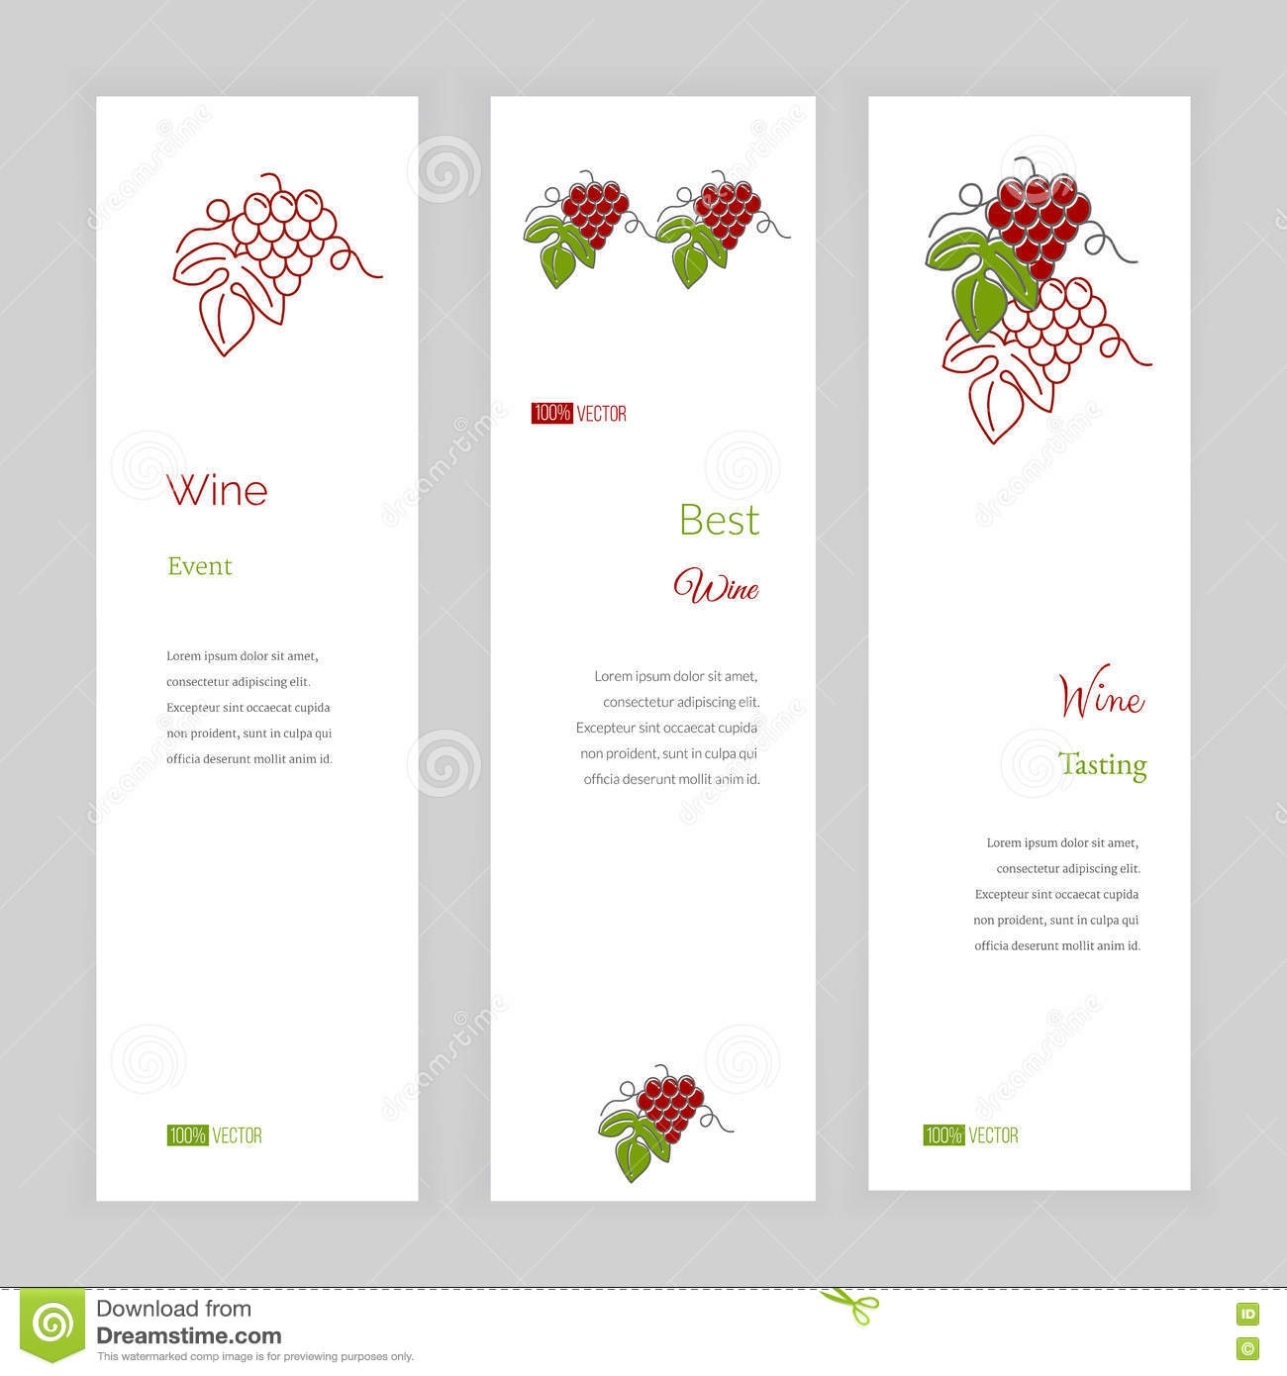 Wine Business Vector Template. Stock Vector – Illustration Of Fruit With Regard To Wine Bar Business Plan Template